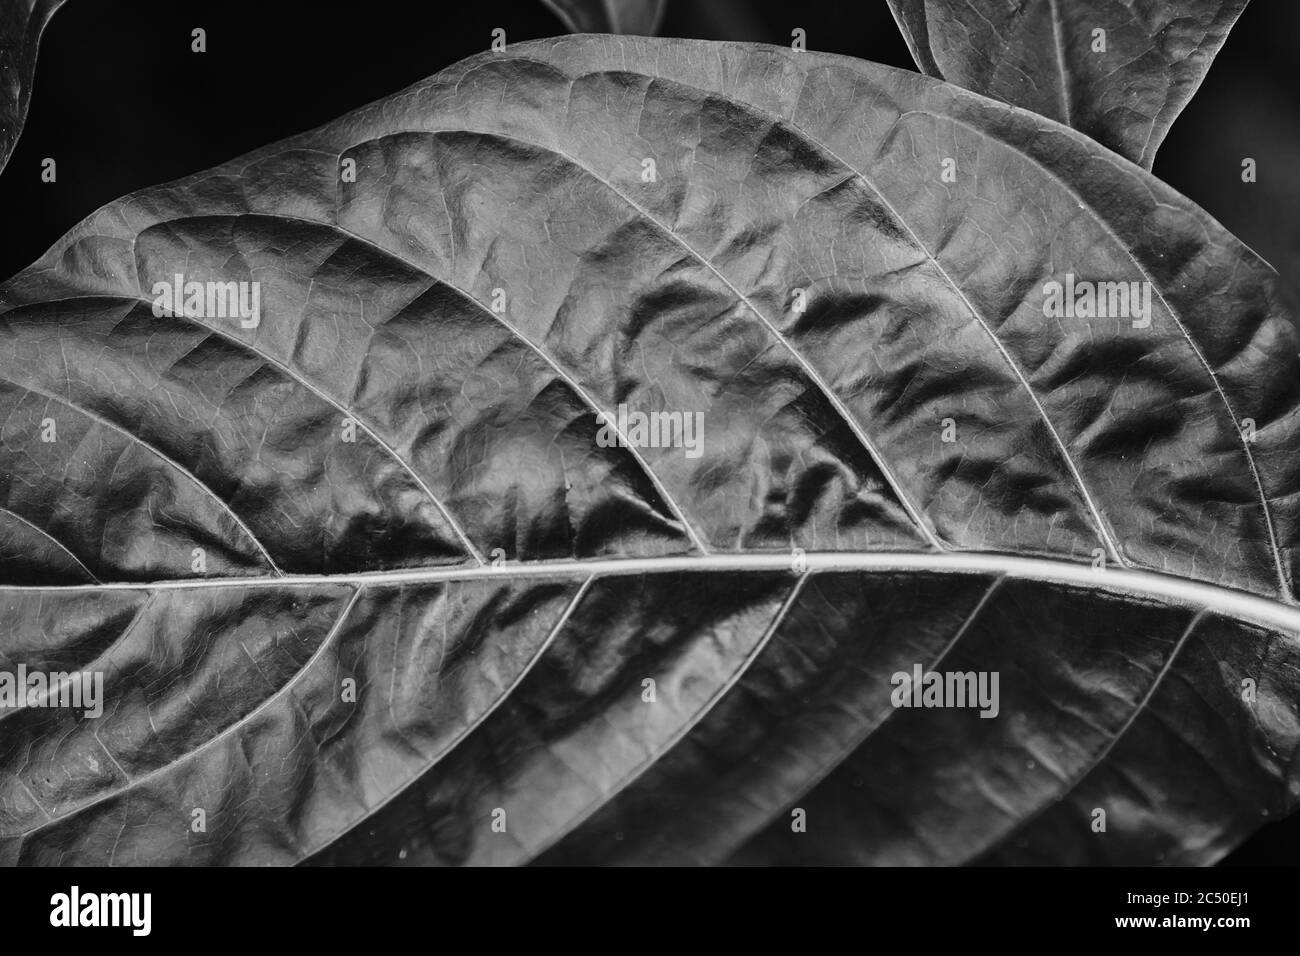 leaves of ficus. Aspidistra leaves. Beauty of tropical plants. Stock Photo